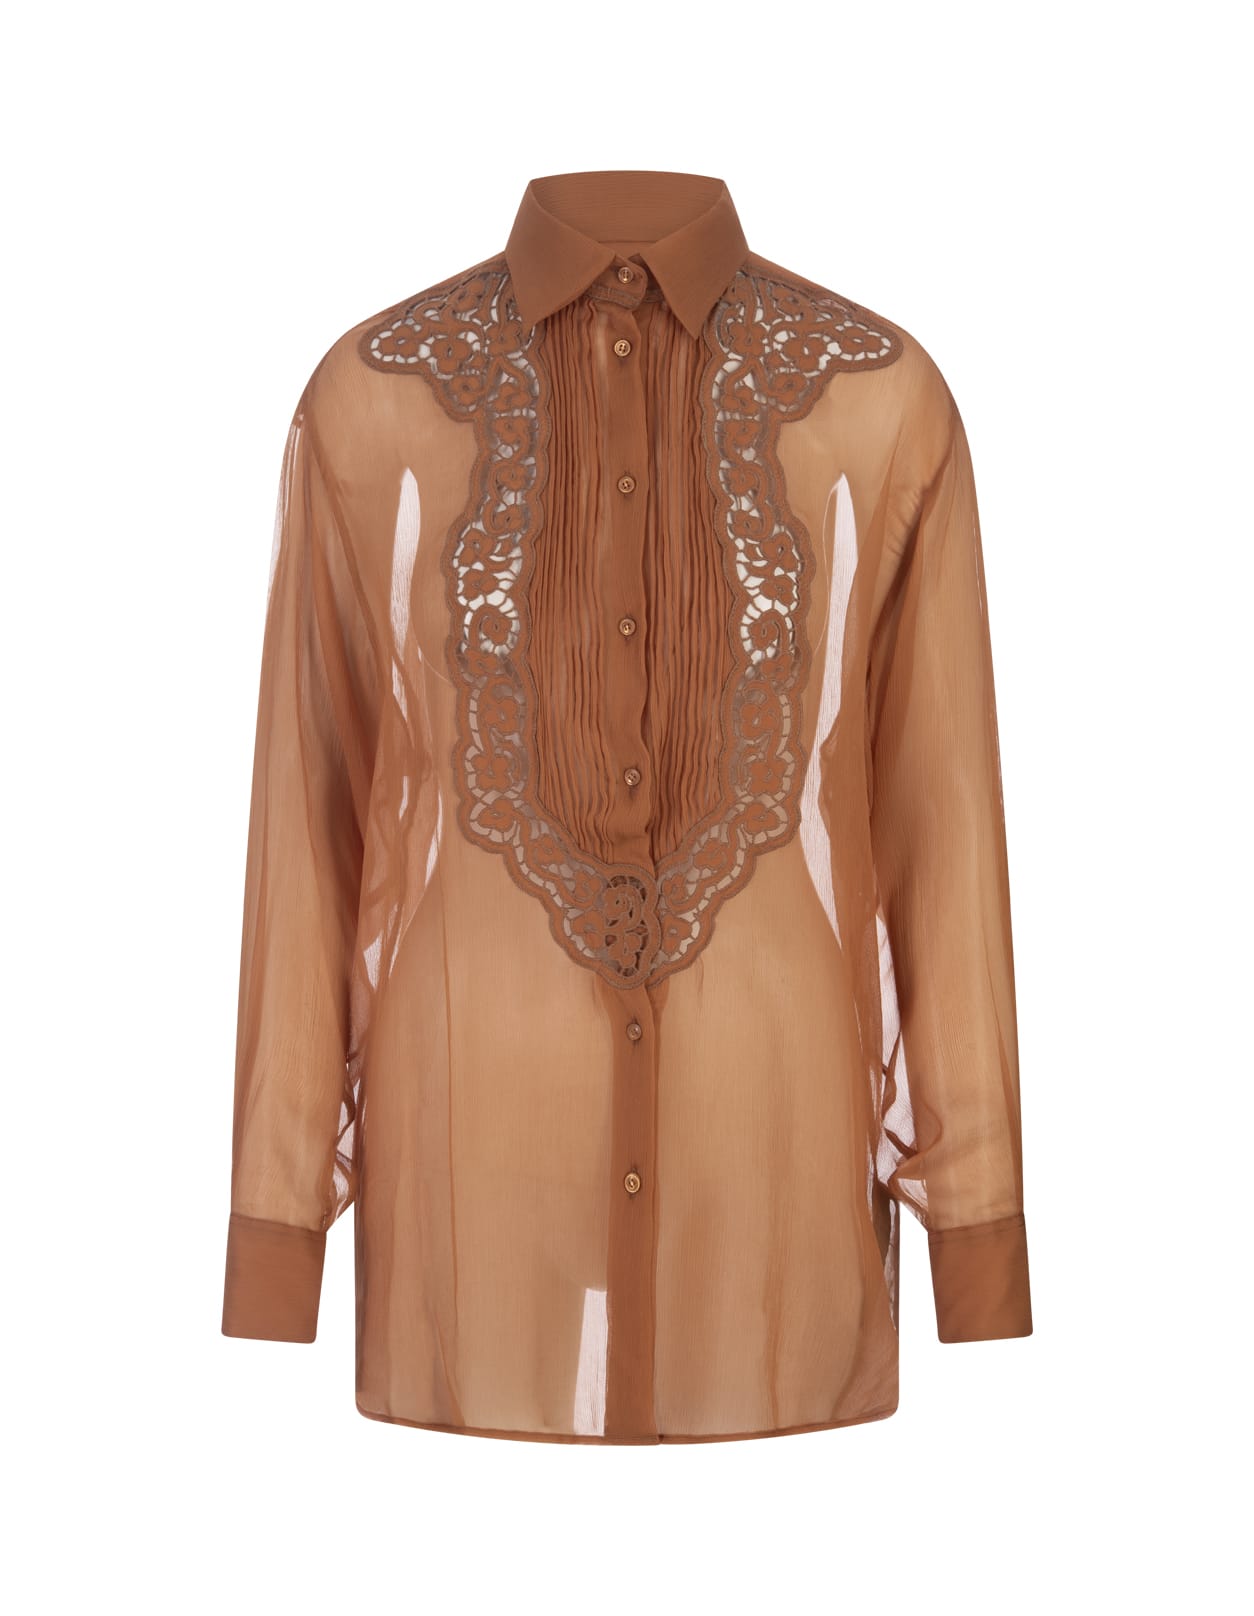 Ermanno Scervino Brown Crepe Georgette Shirt With Lace